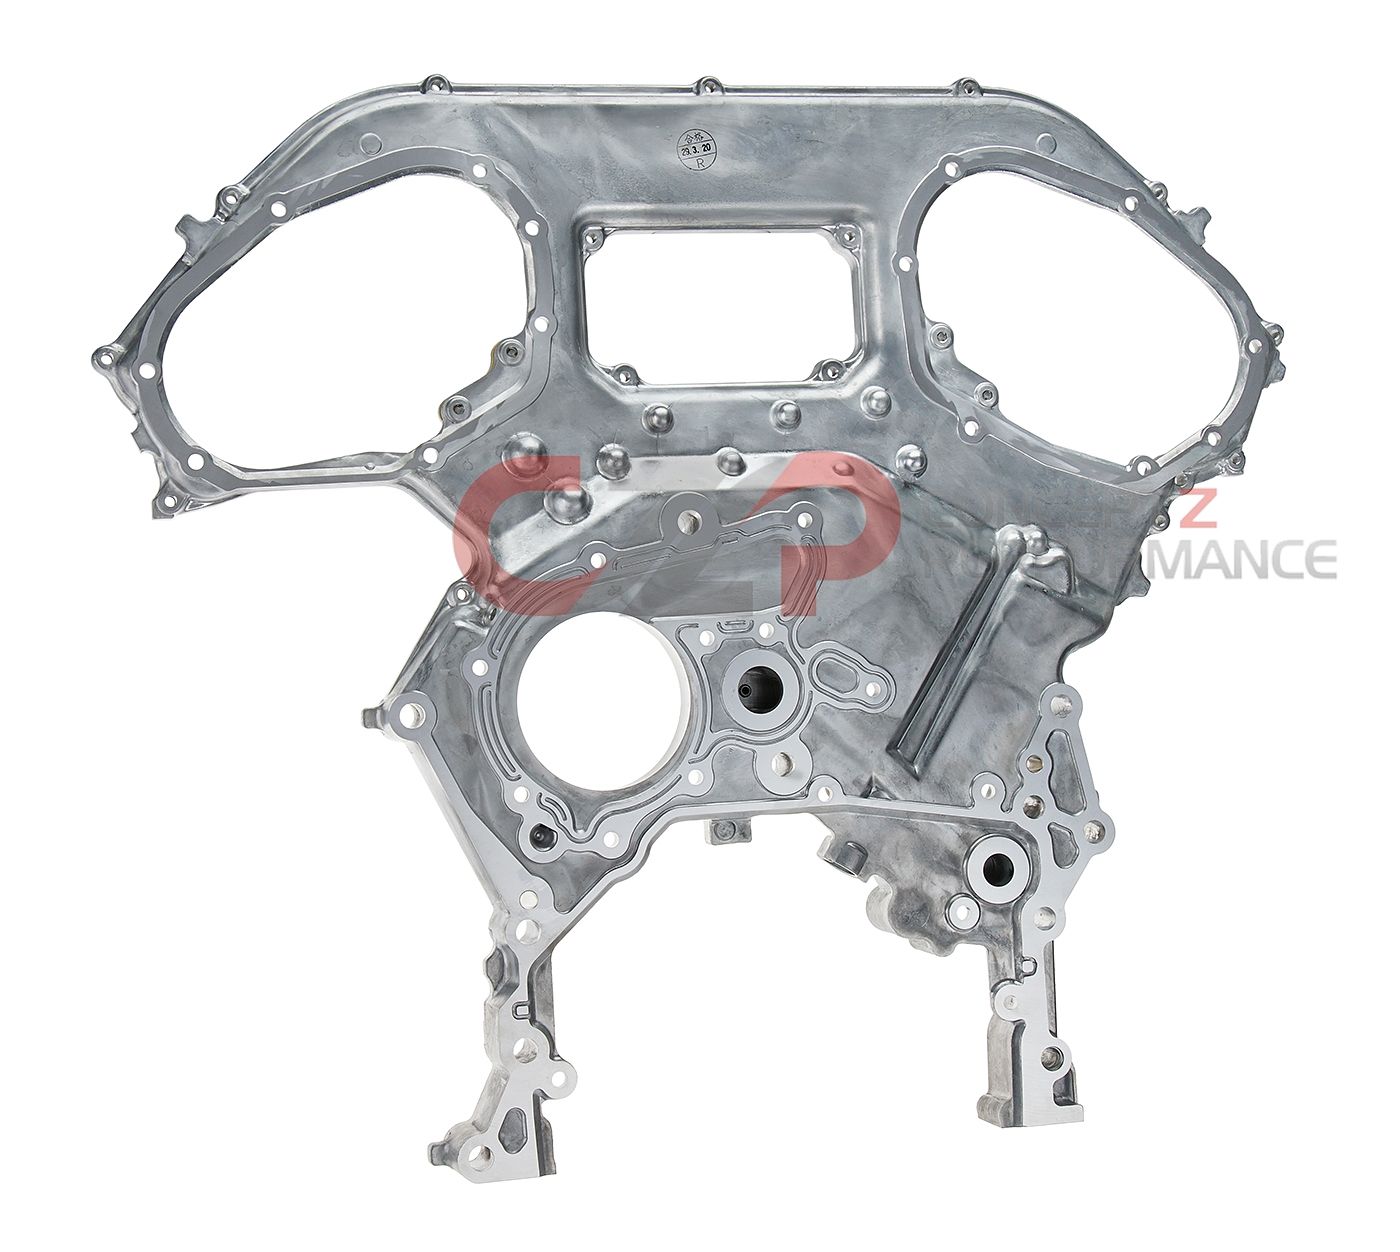 Nissan OEM Timing Chain Engine Cover, Front - Nissan GT-R 09+ R35